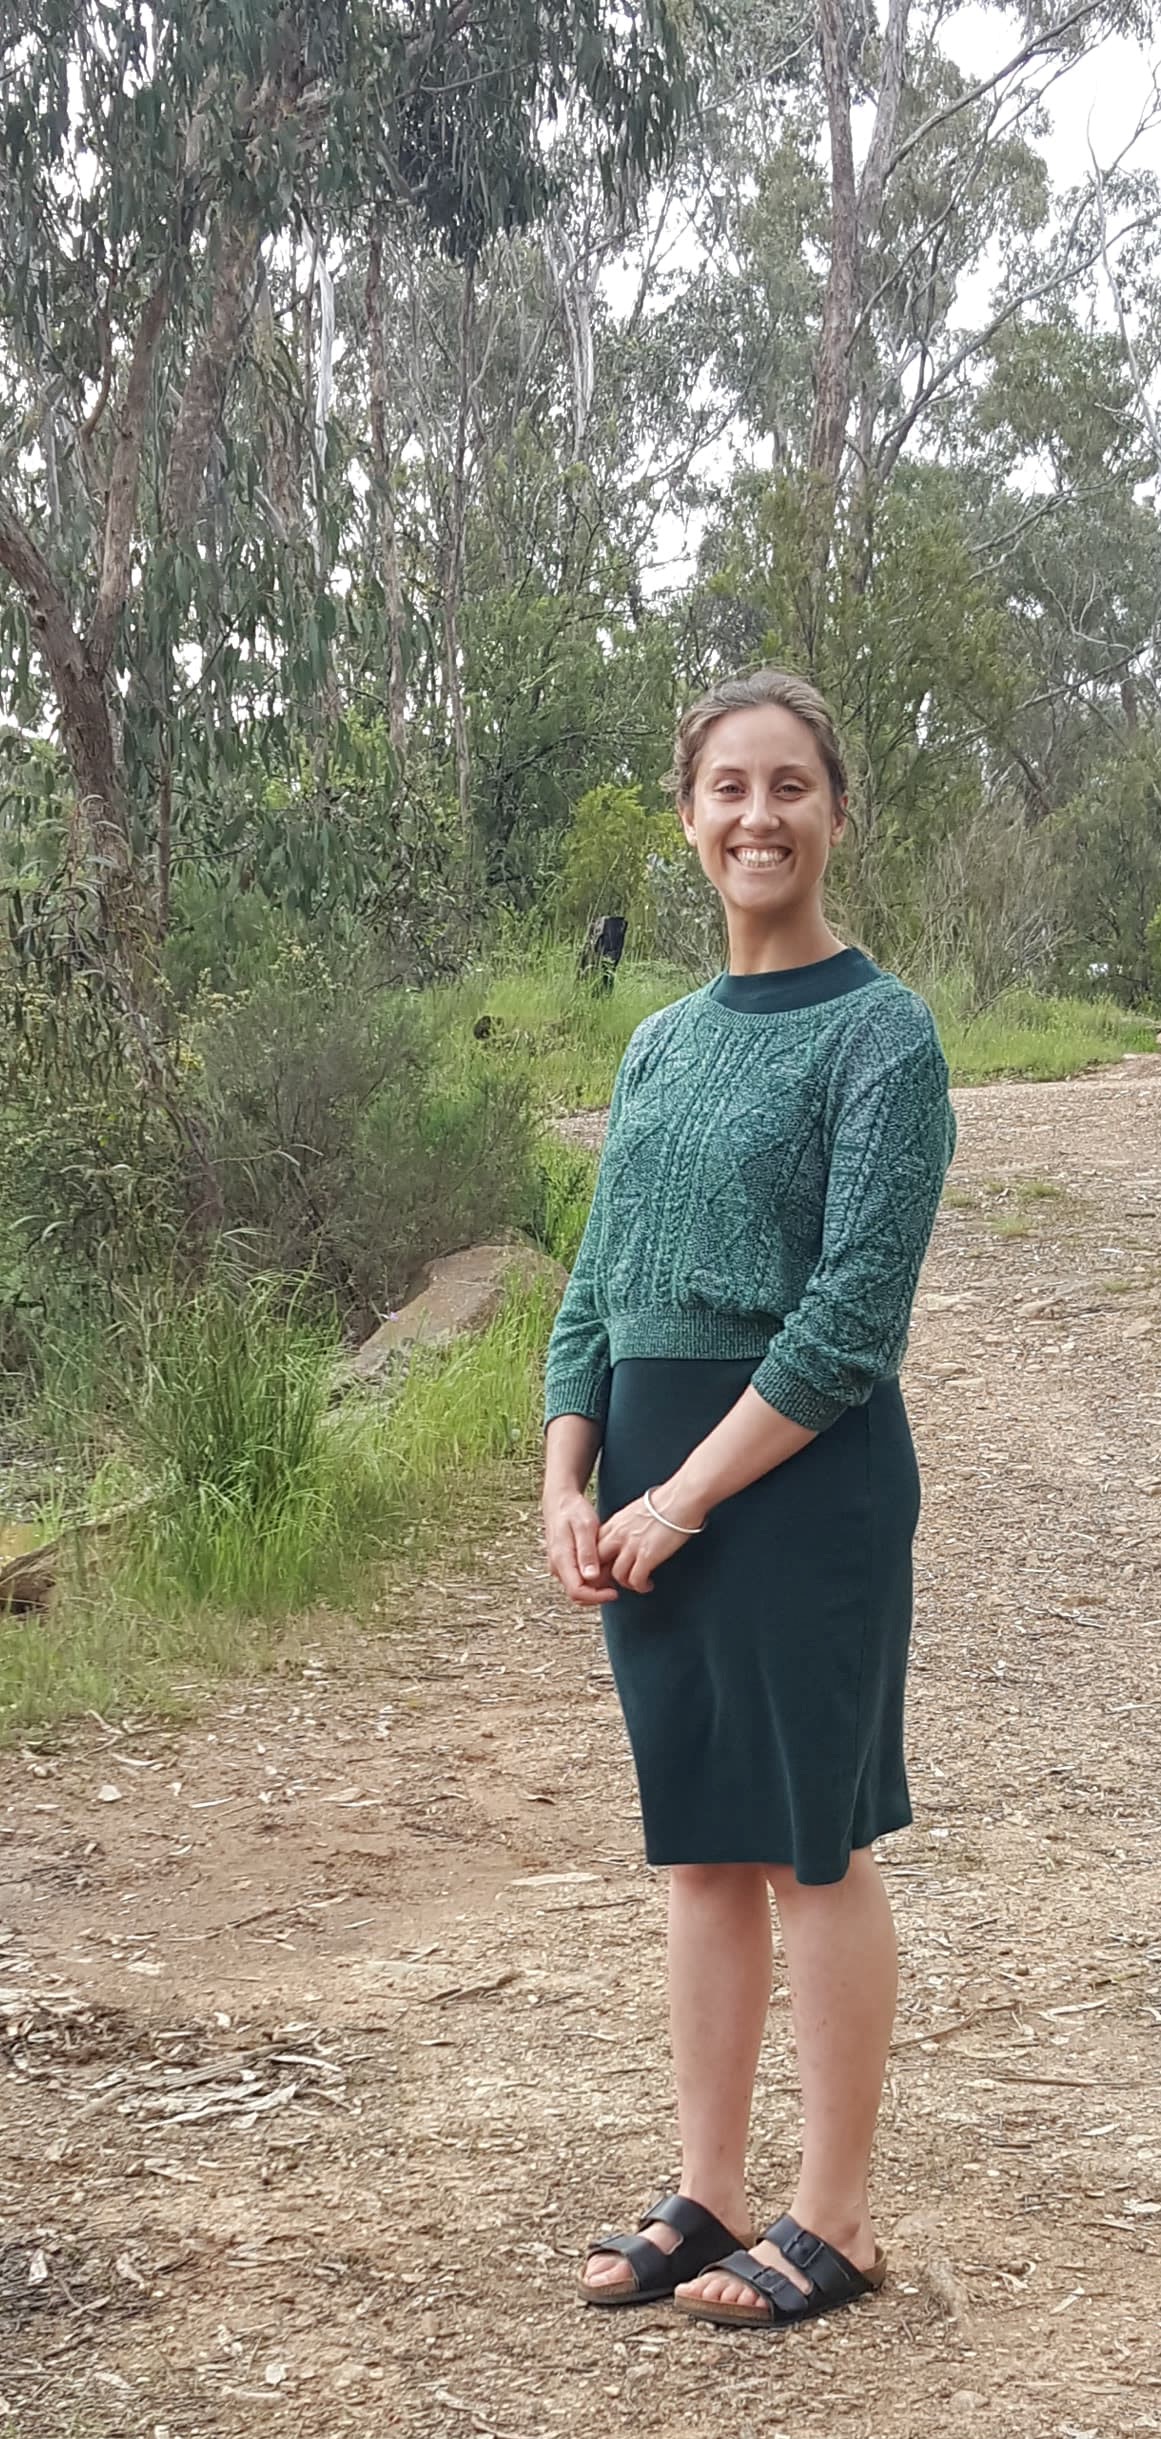 Marlena Raymond. A photo of a person standing outside with trees behind them. Person is smiling, standing and wearing green shirt and black skirt